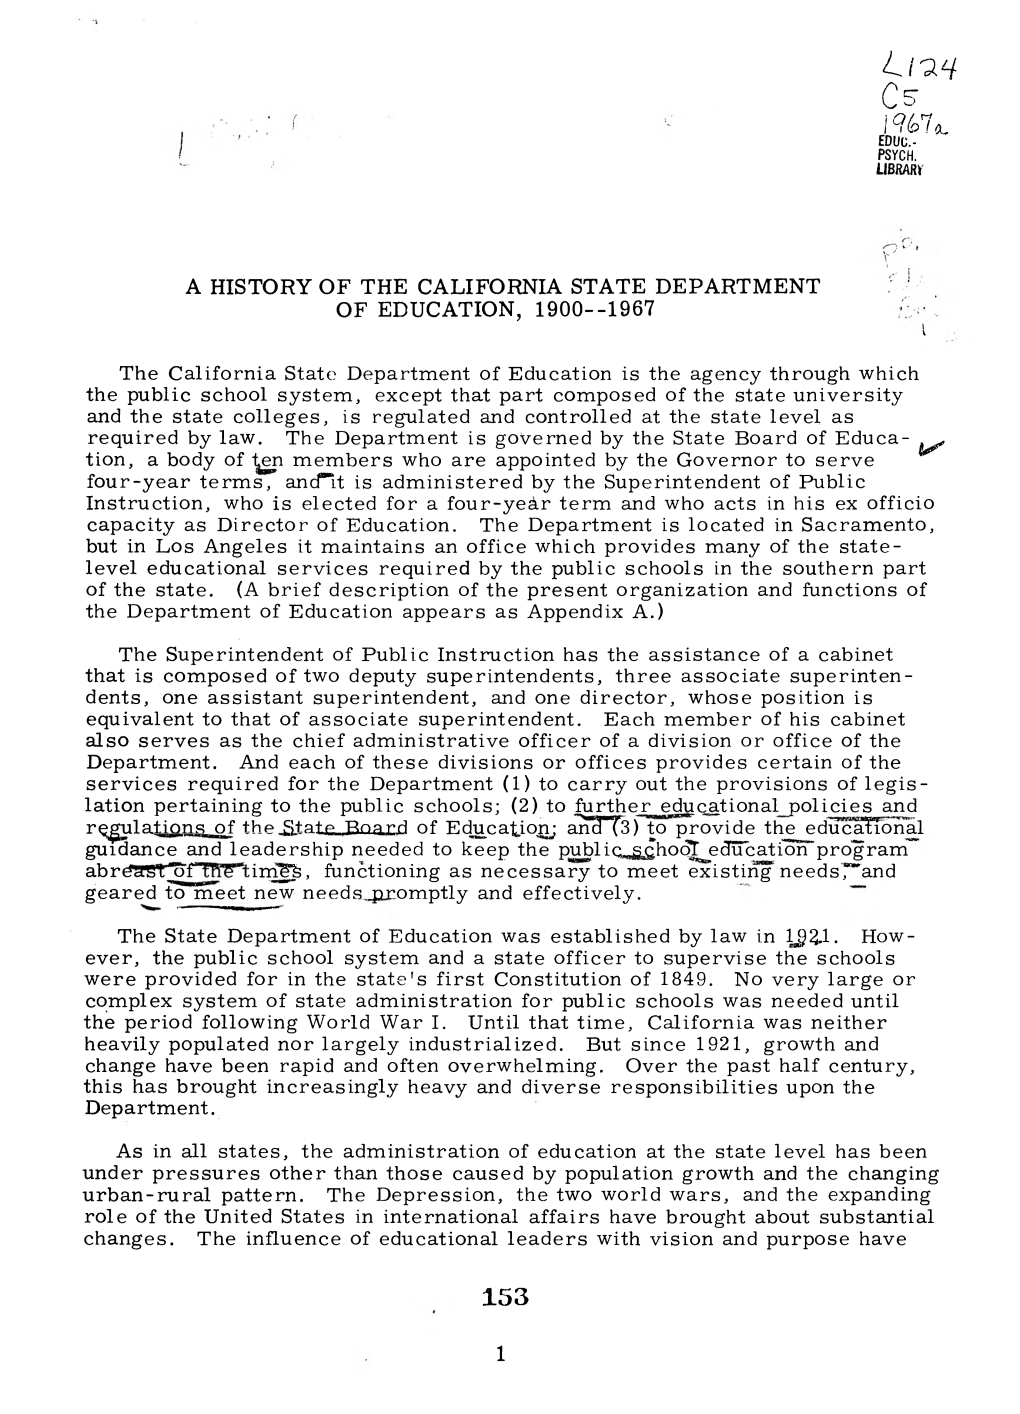 A History of the California State Department of Education, 1900-1967